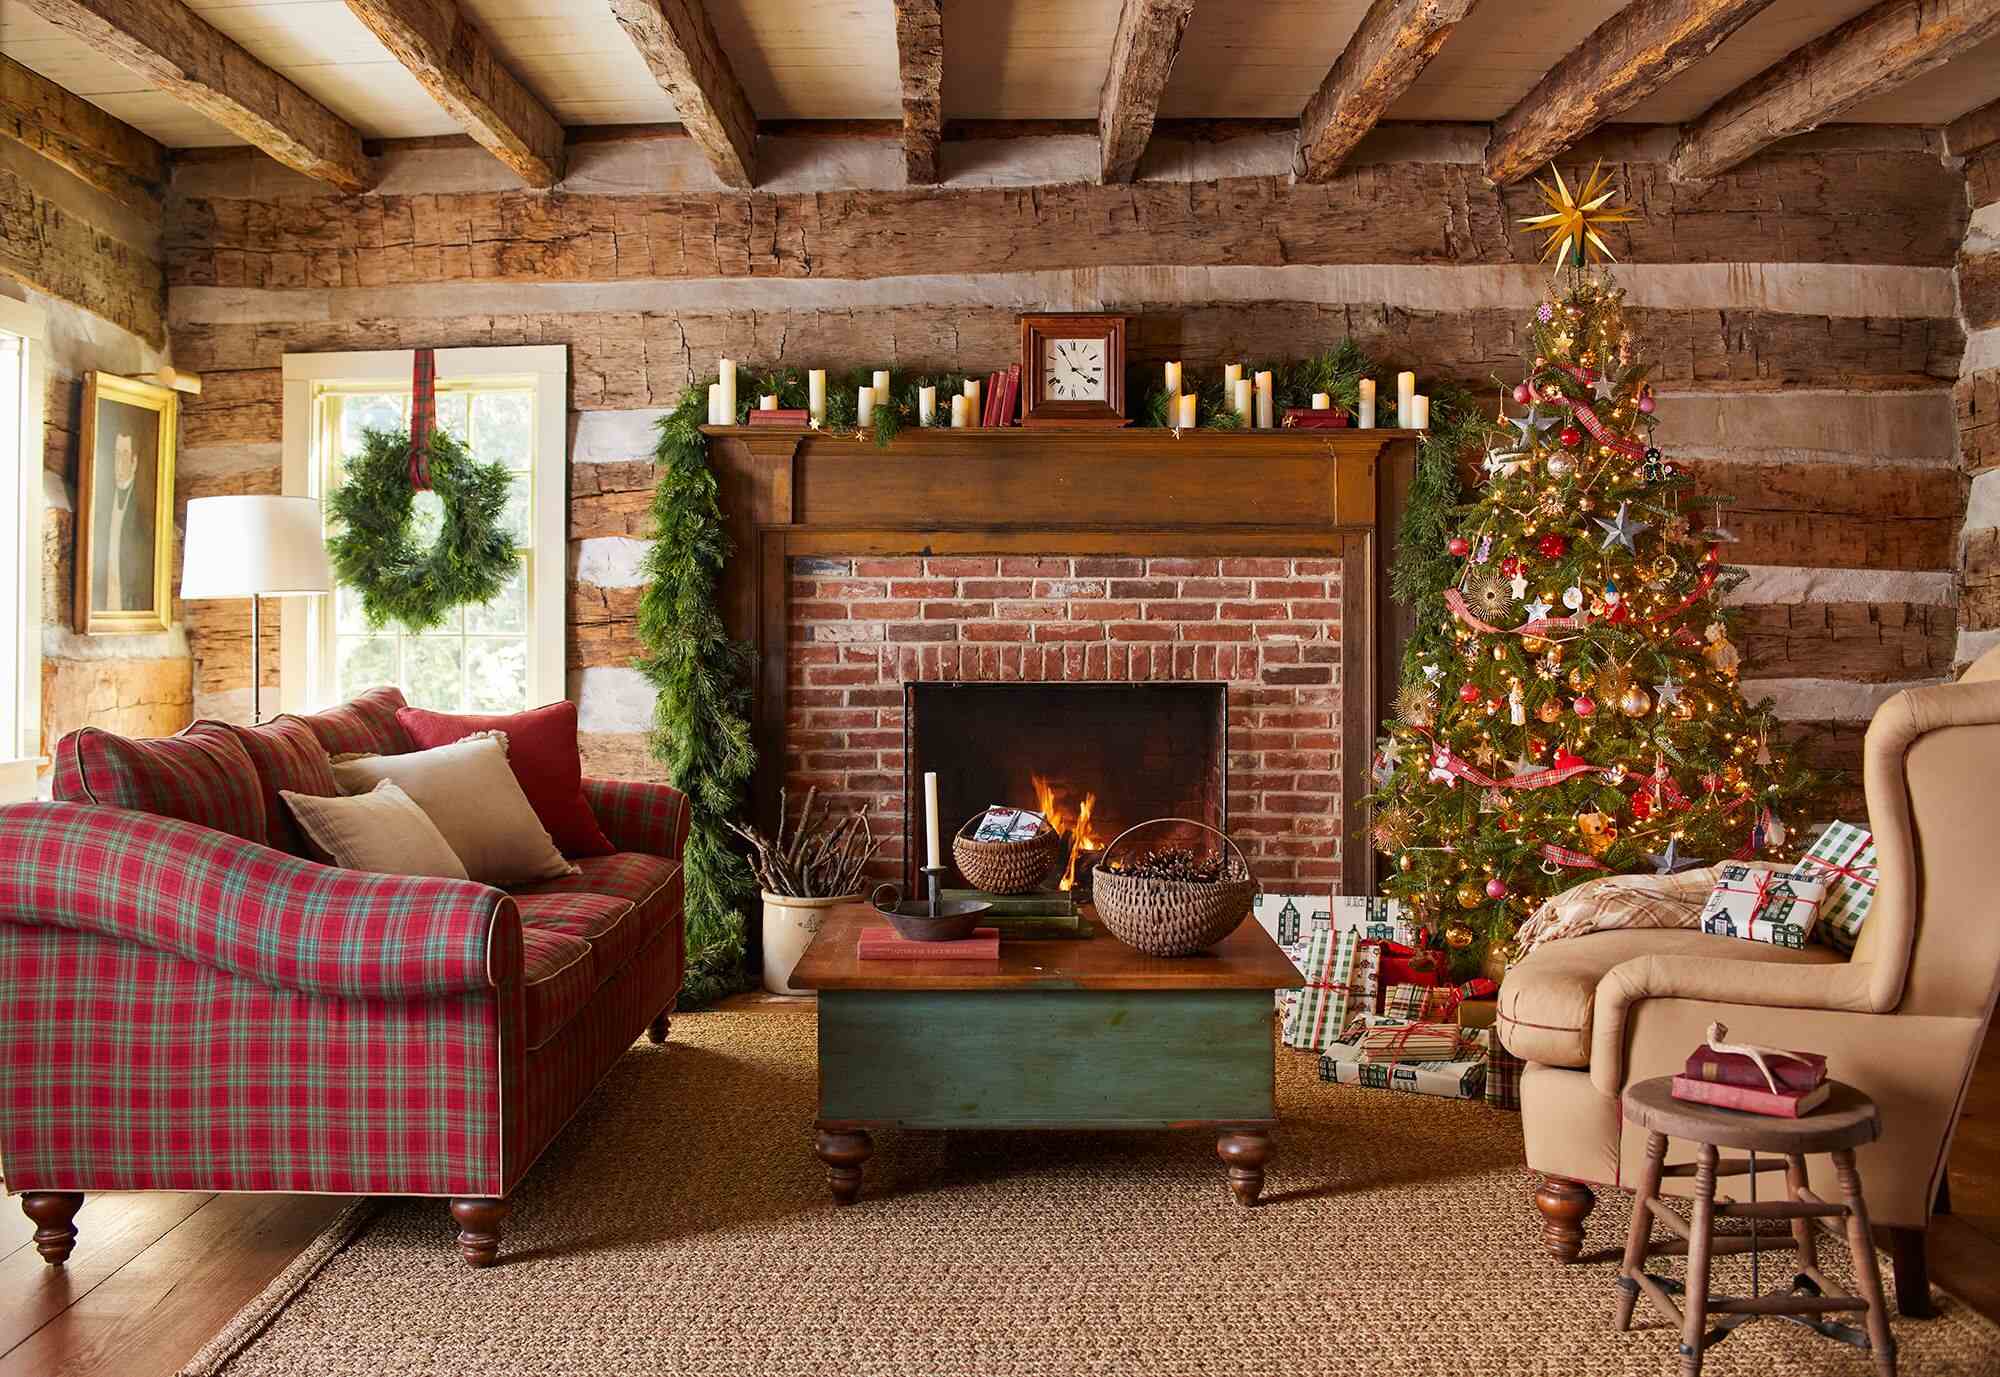 Where To Put Christmas Tree In Small Living Room